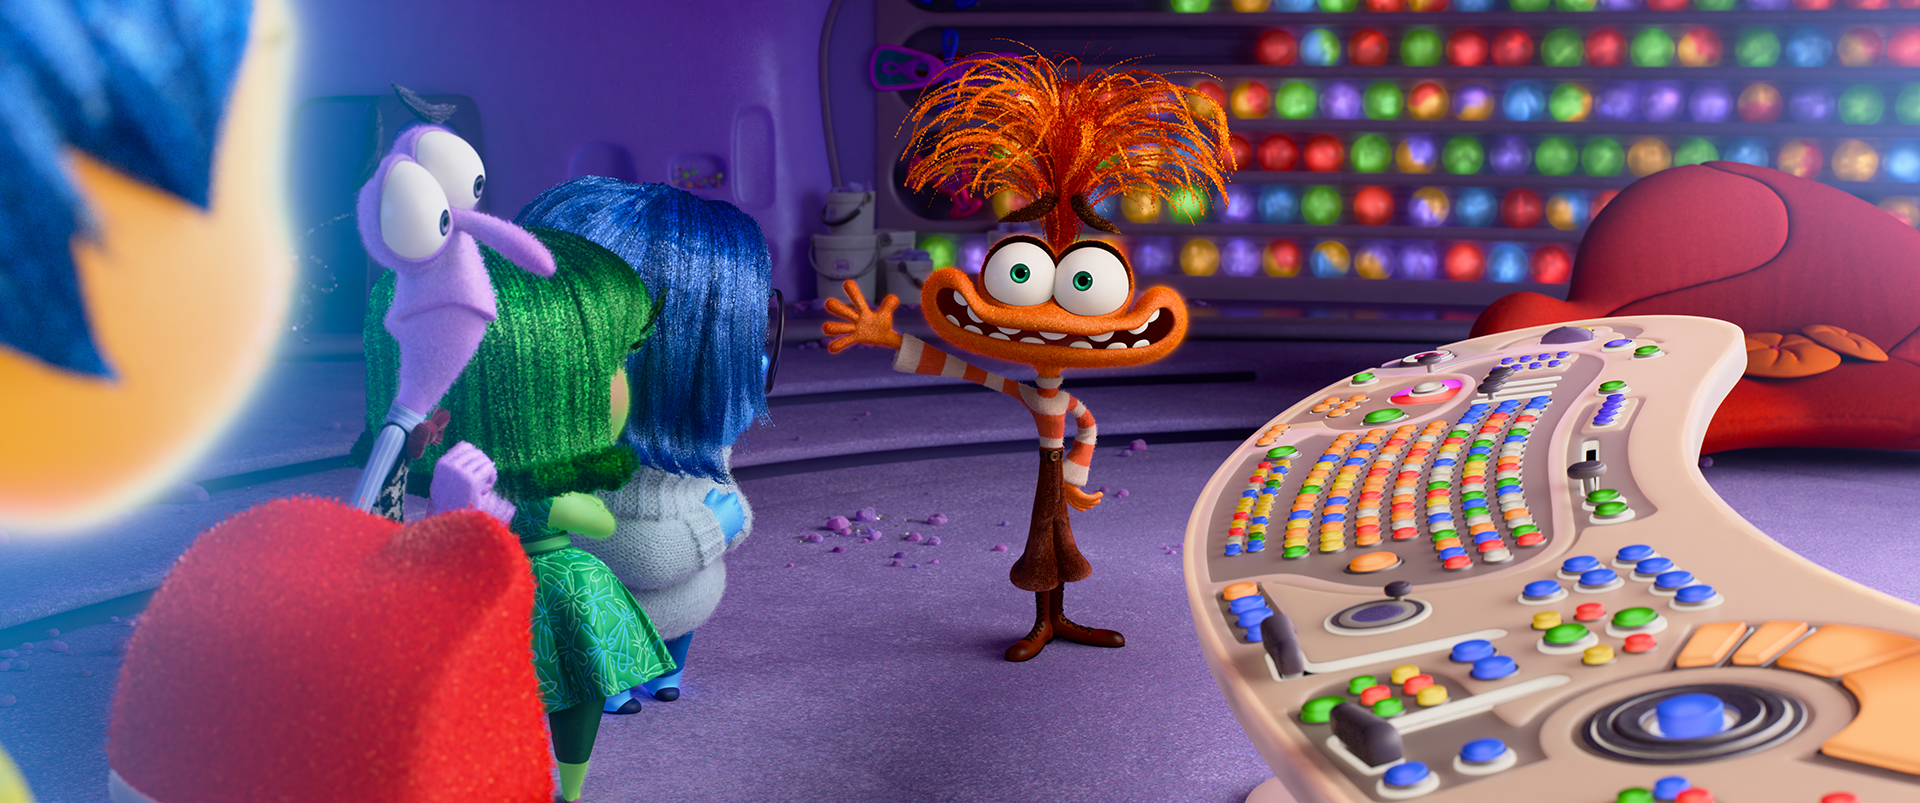 Disney and Pixar Introduce a New Emotion in 'Inside Out 2' Trailer